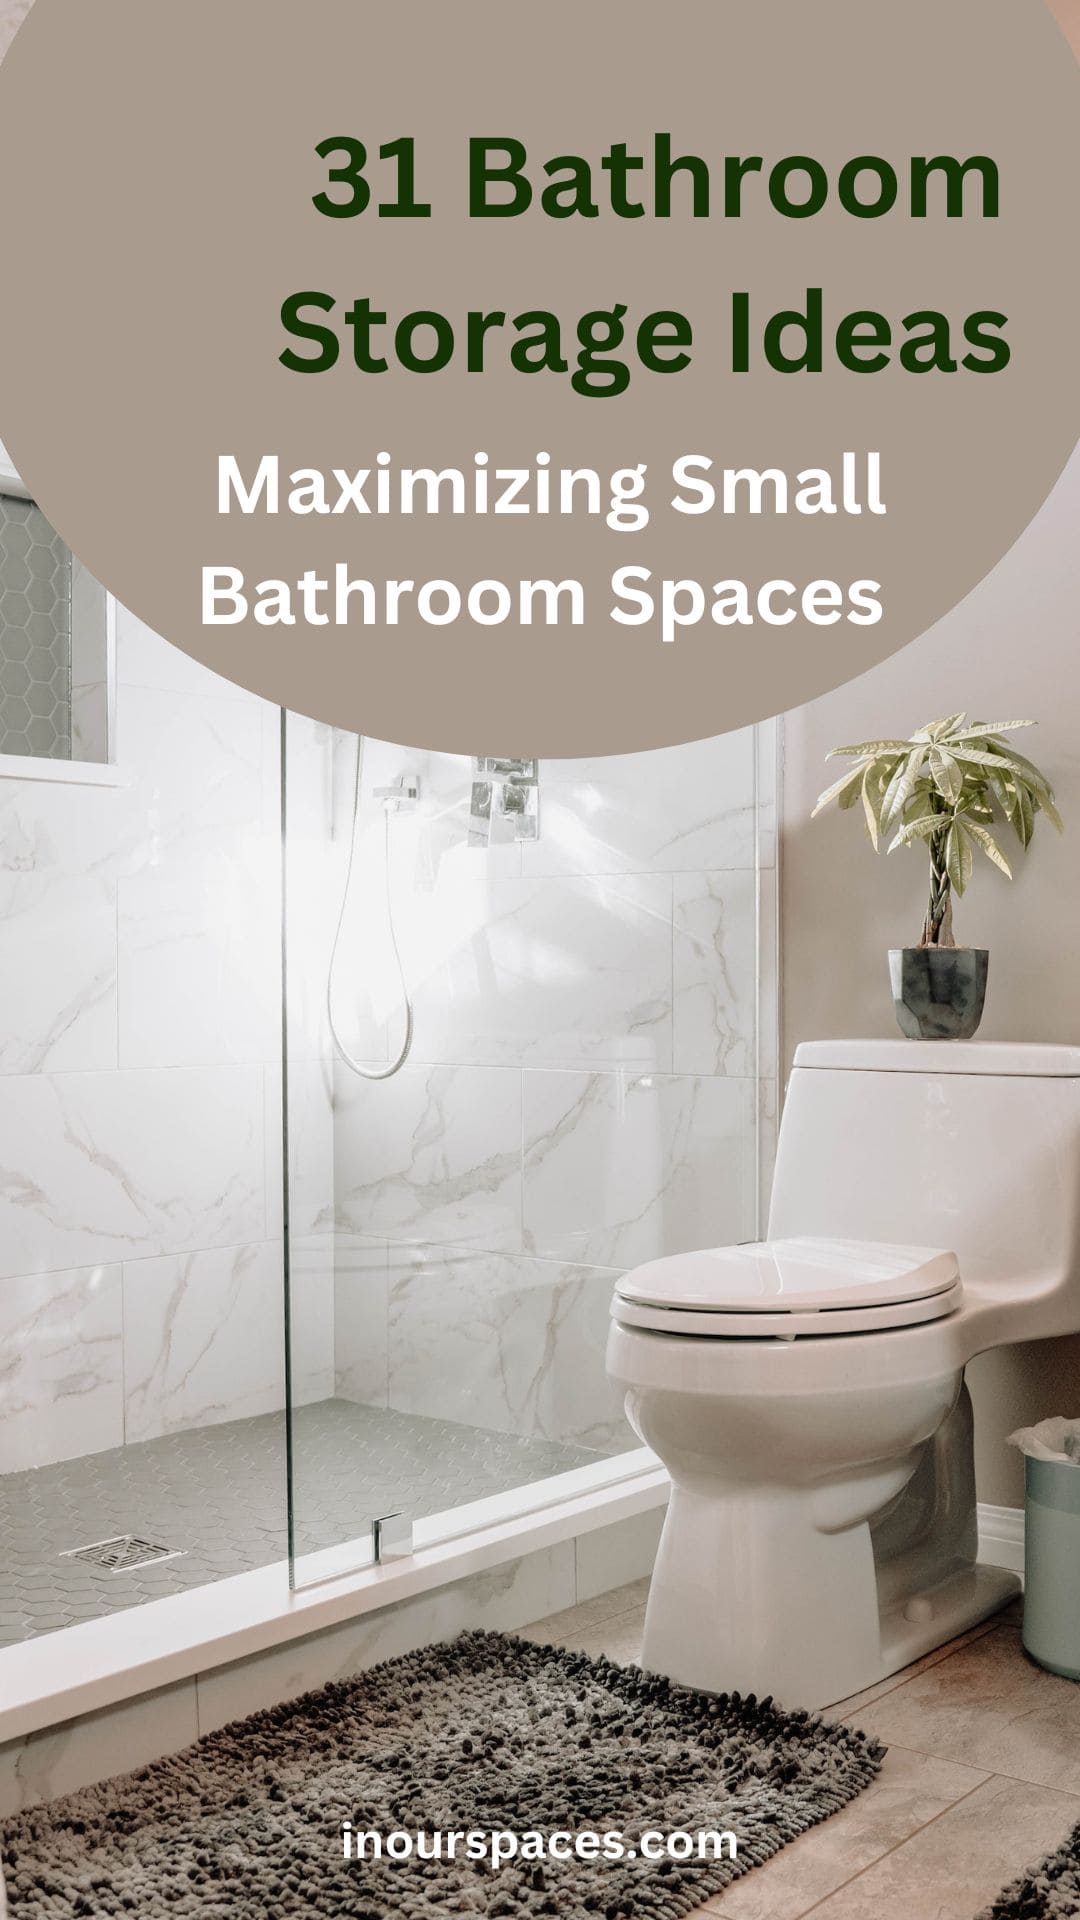 image of small neutral and calm bathroom with text "31 bathroom storage ideas: Maximizing small bathroom spaces